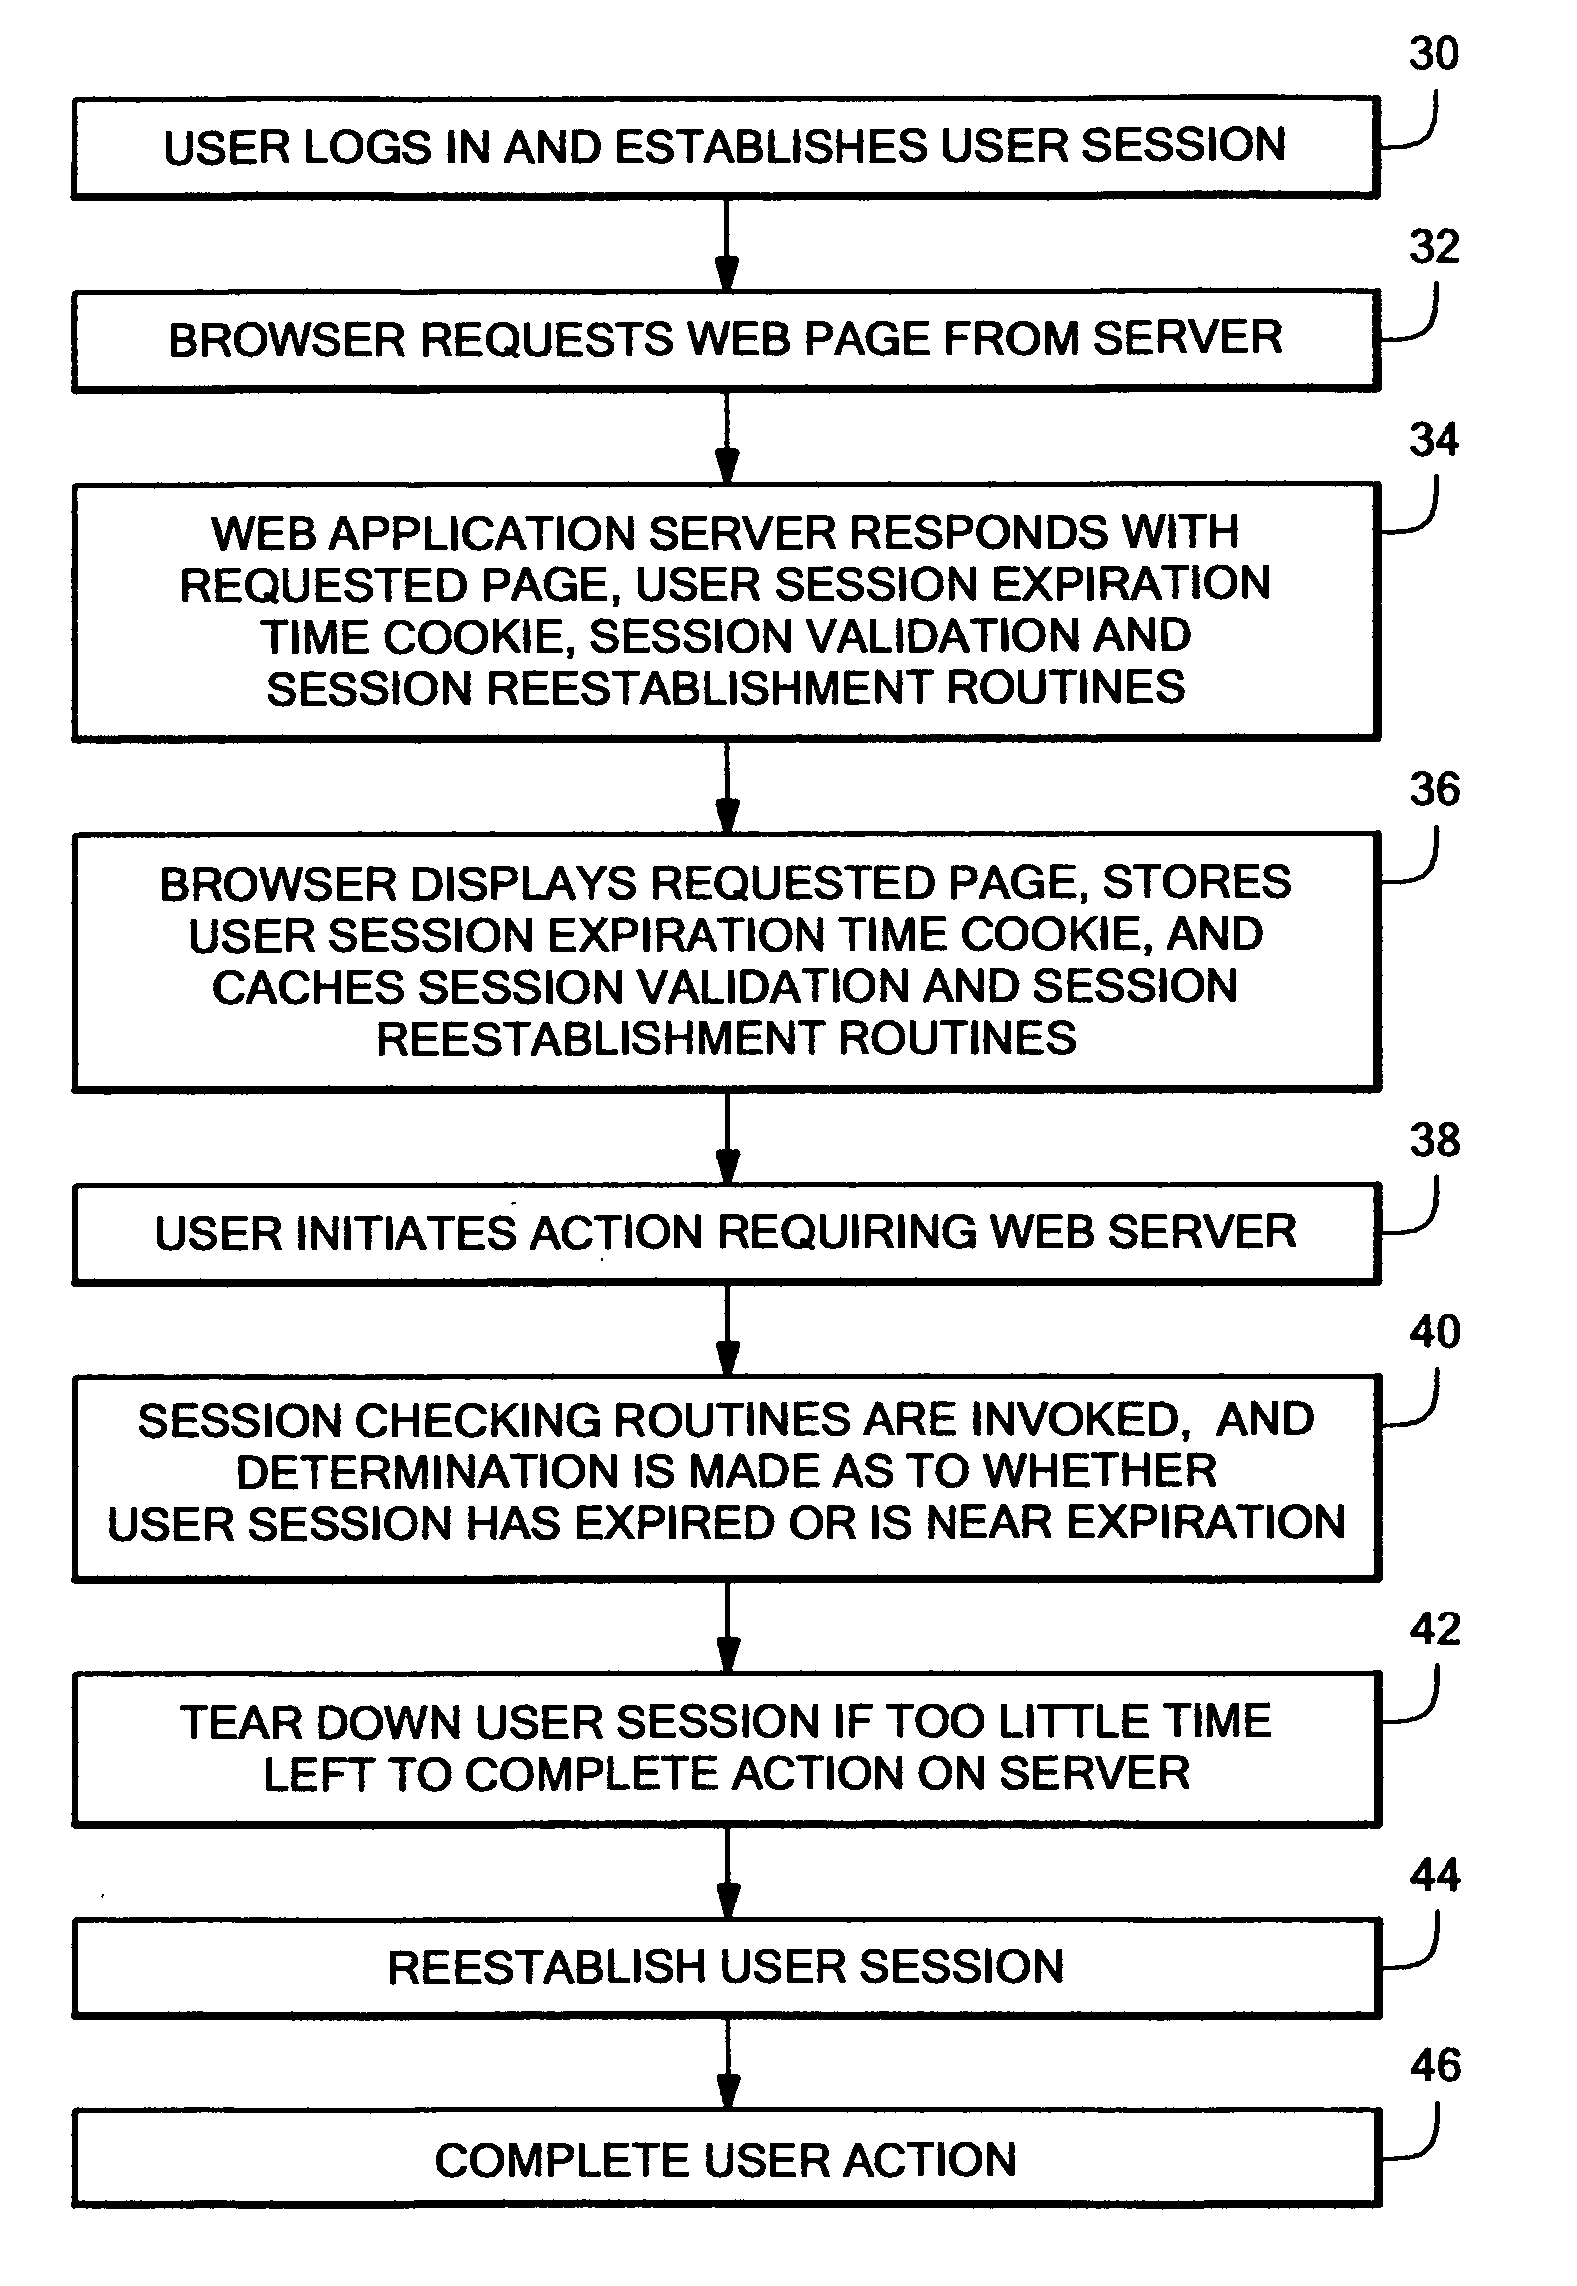 System and method for gracefully reestablishing an expired browser session